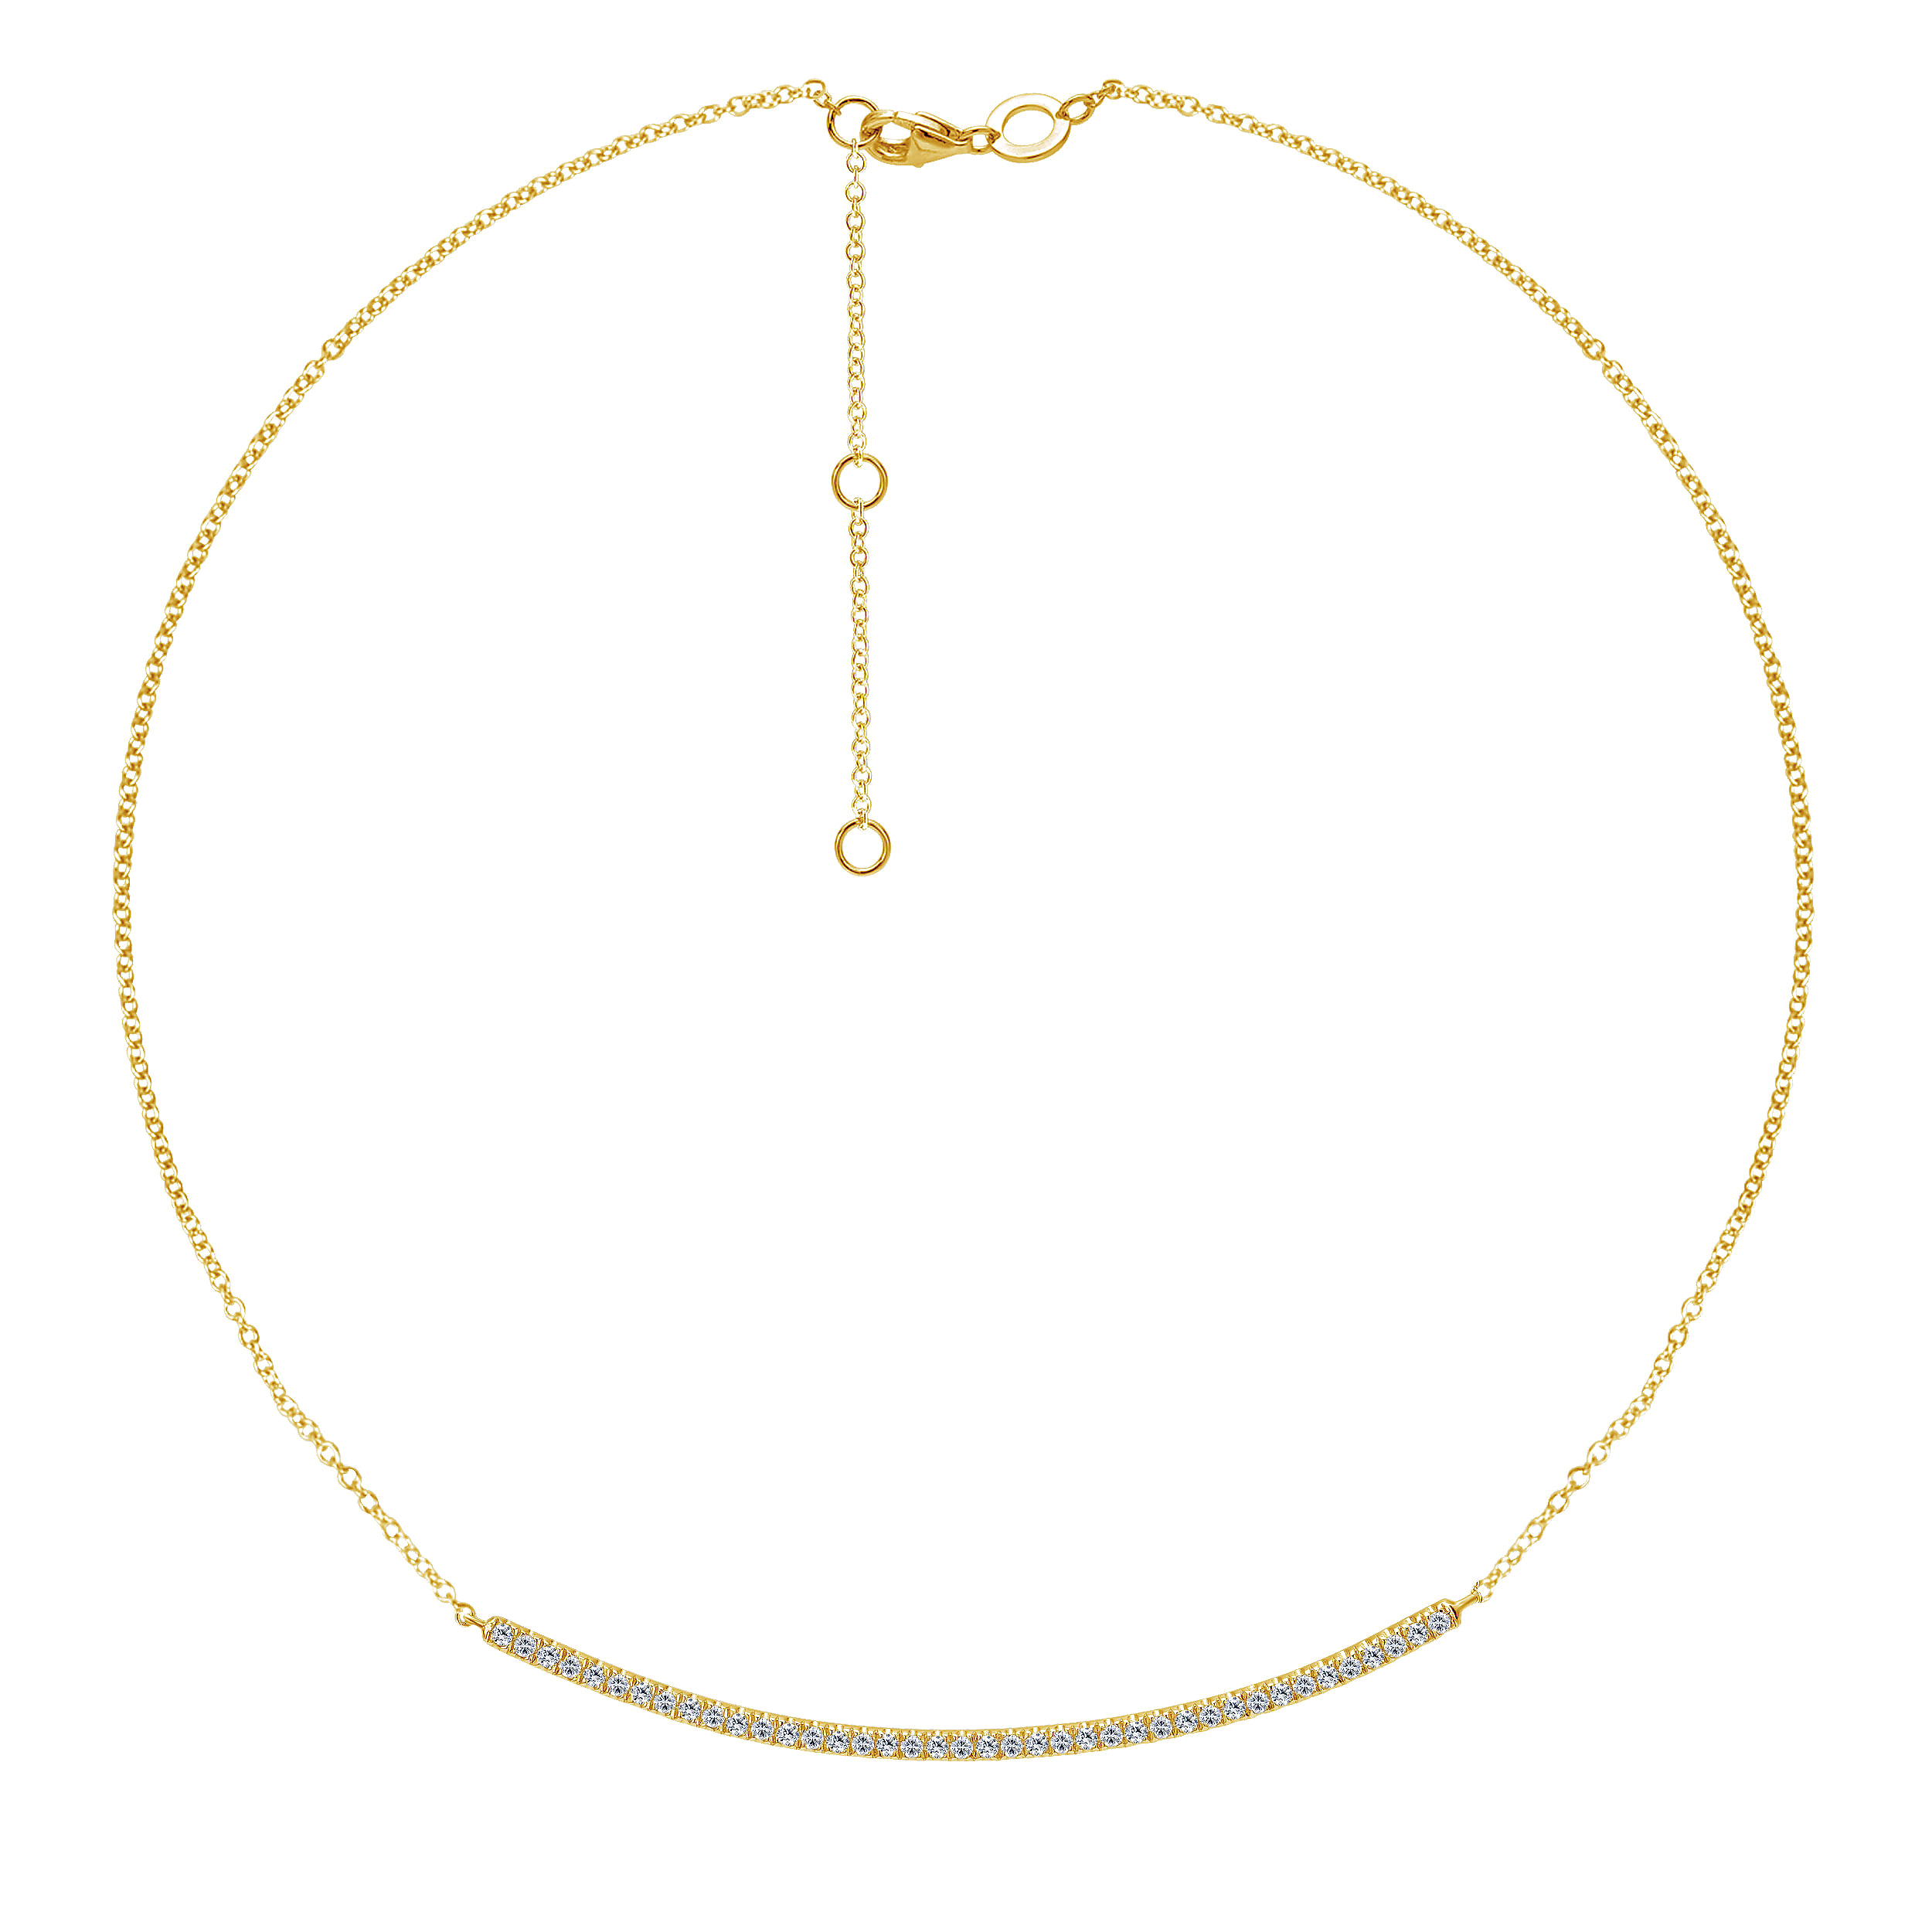 18 inch 14K Yellow Gold Diamond Pavé Curved Bar Necklace